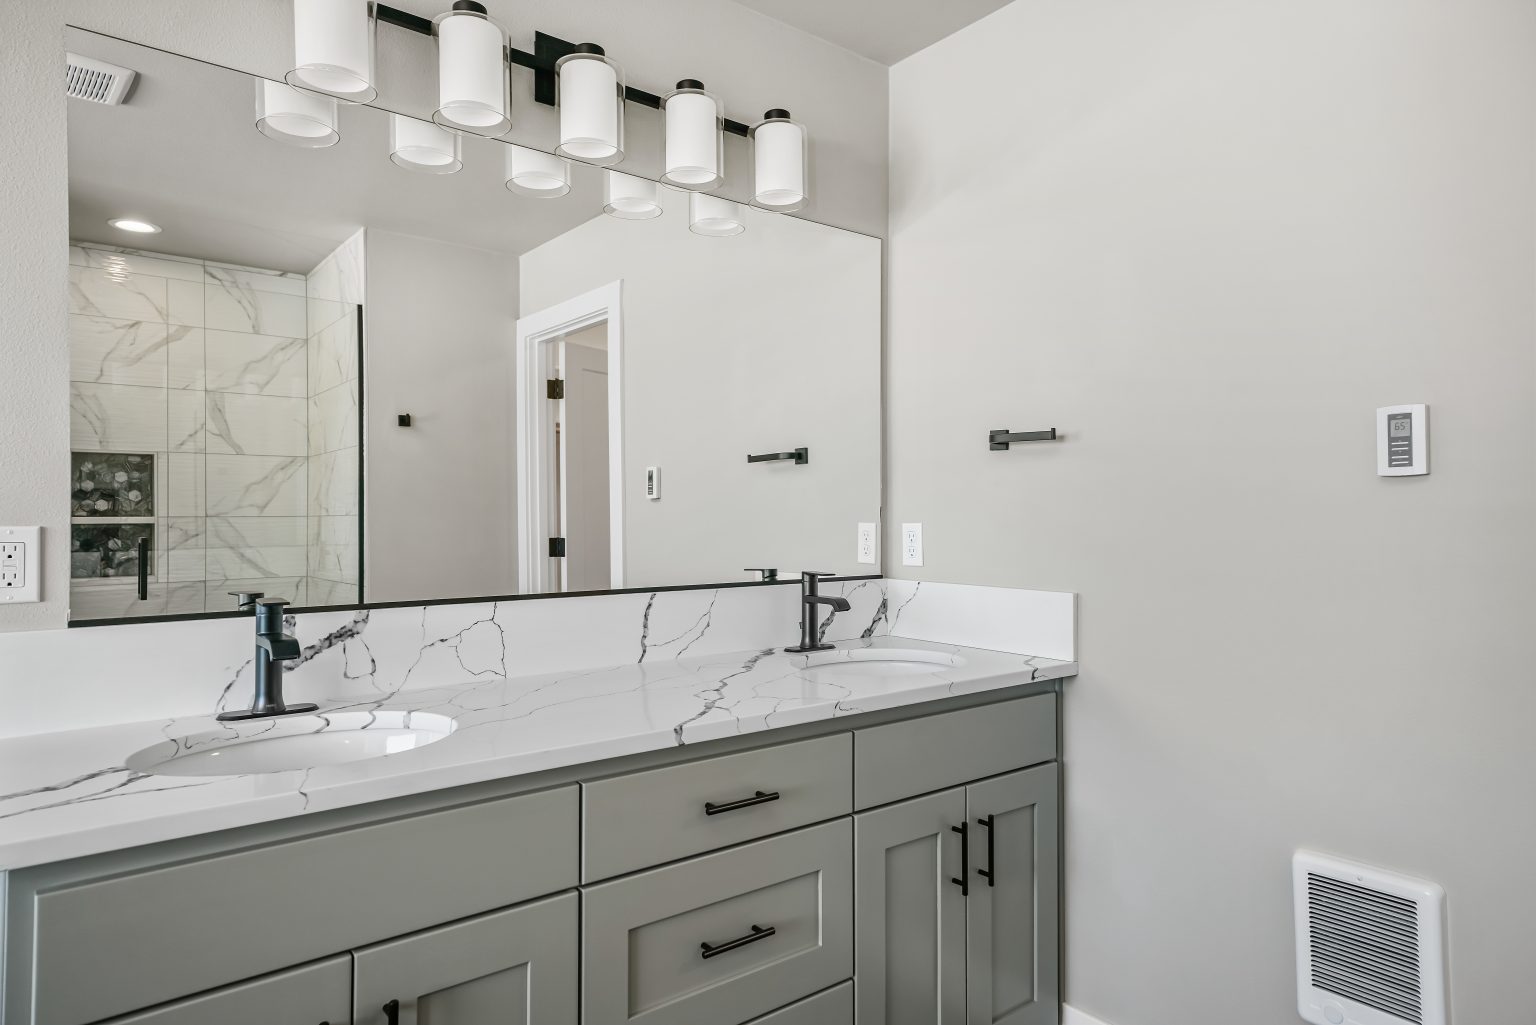 bathroom with greenish gray cabinets, and white marble counters with gray veining, dual sinks, large mirror and lighting fixtures